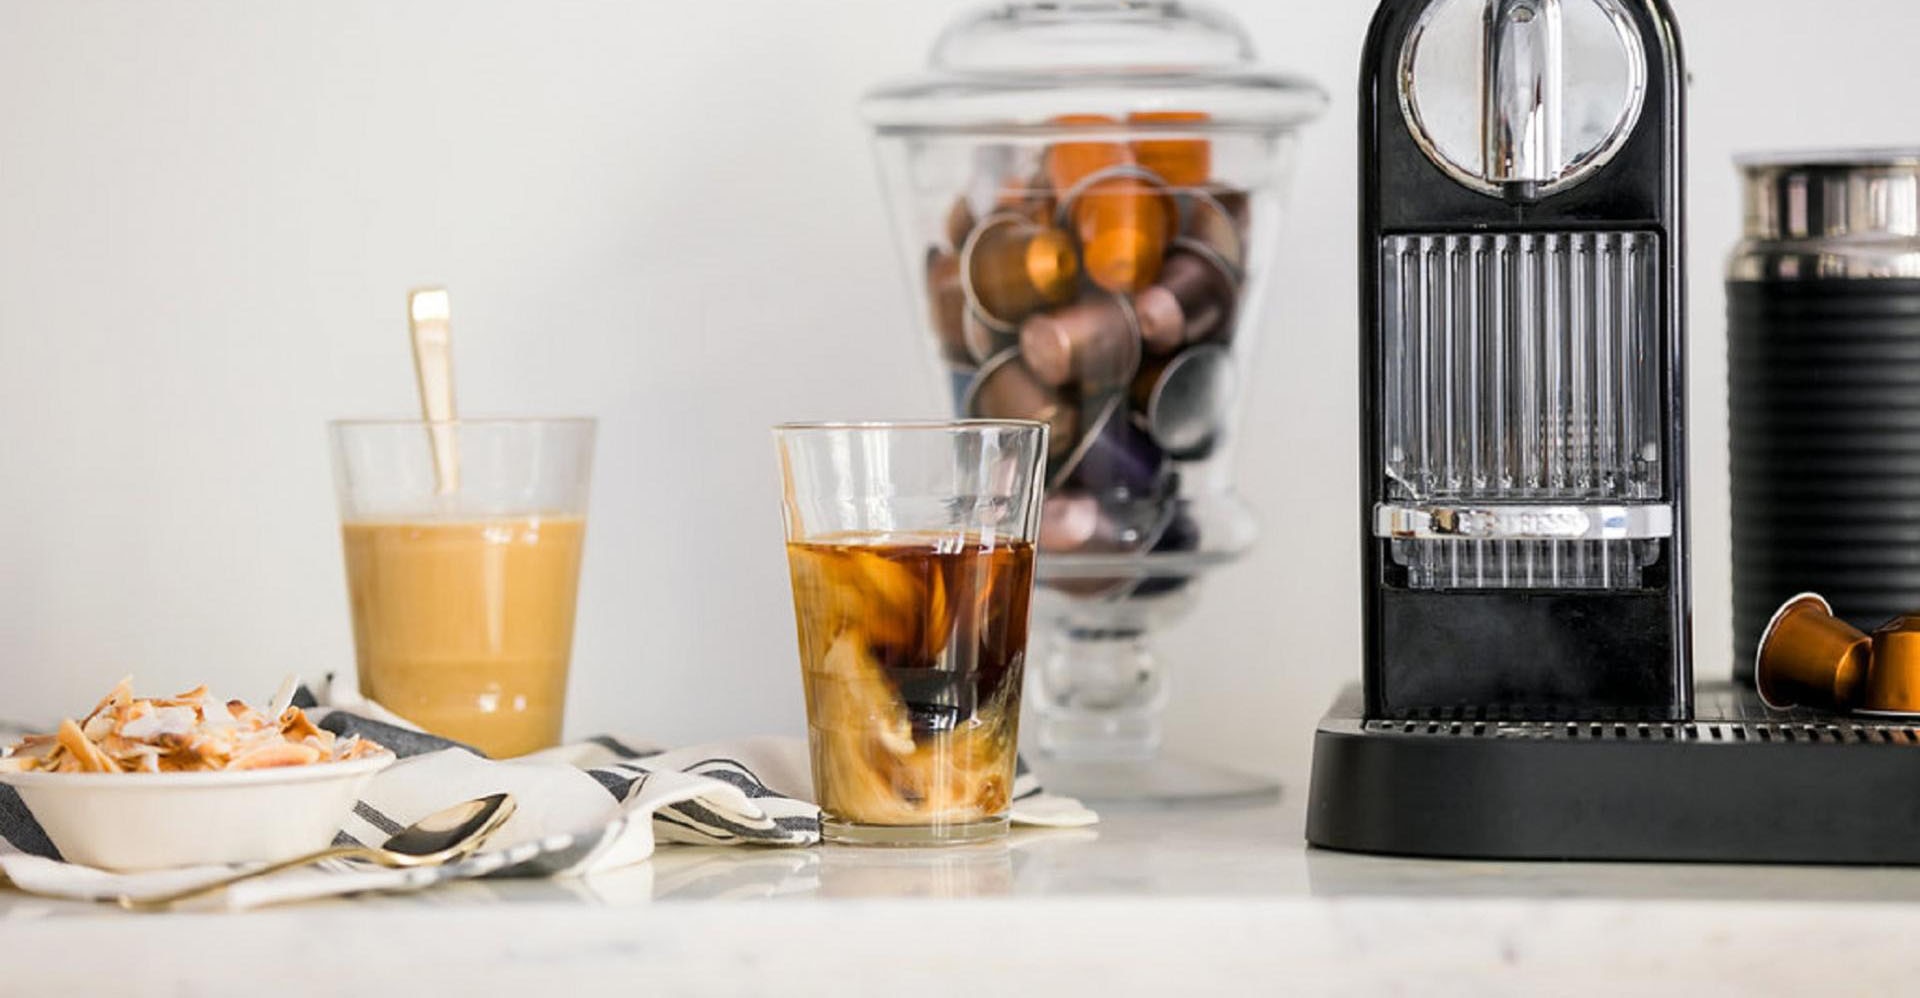 Elevate Your Desserts With The Nespresso Vertuo Pop - WOMAN